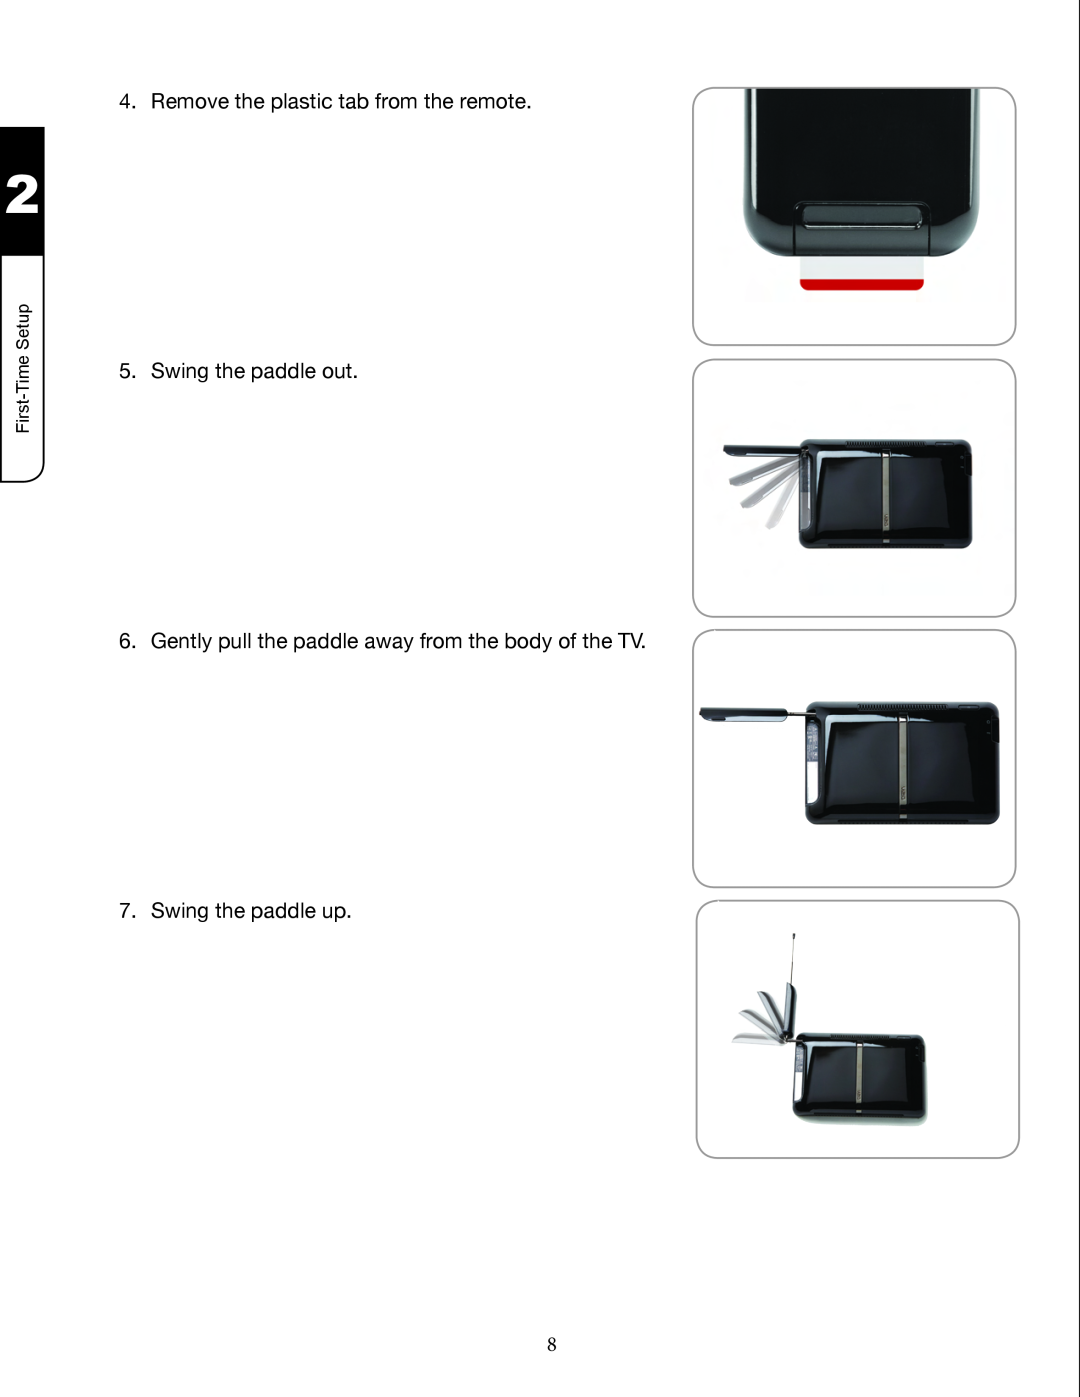 Zanussi VMB070 manual Remove the plastic tab from the remote, Swing the paddle out, Swing the paddle up, First­Time Setup 